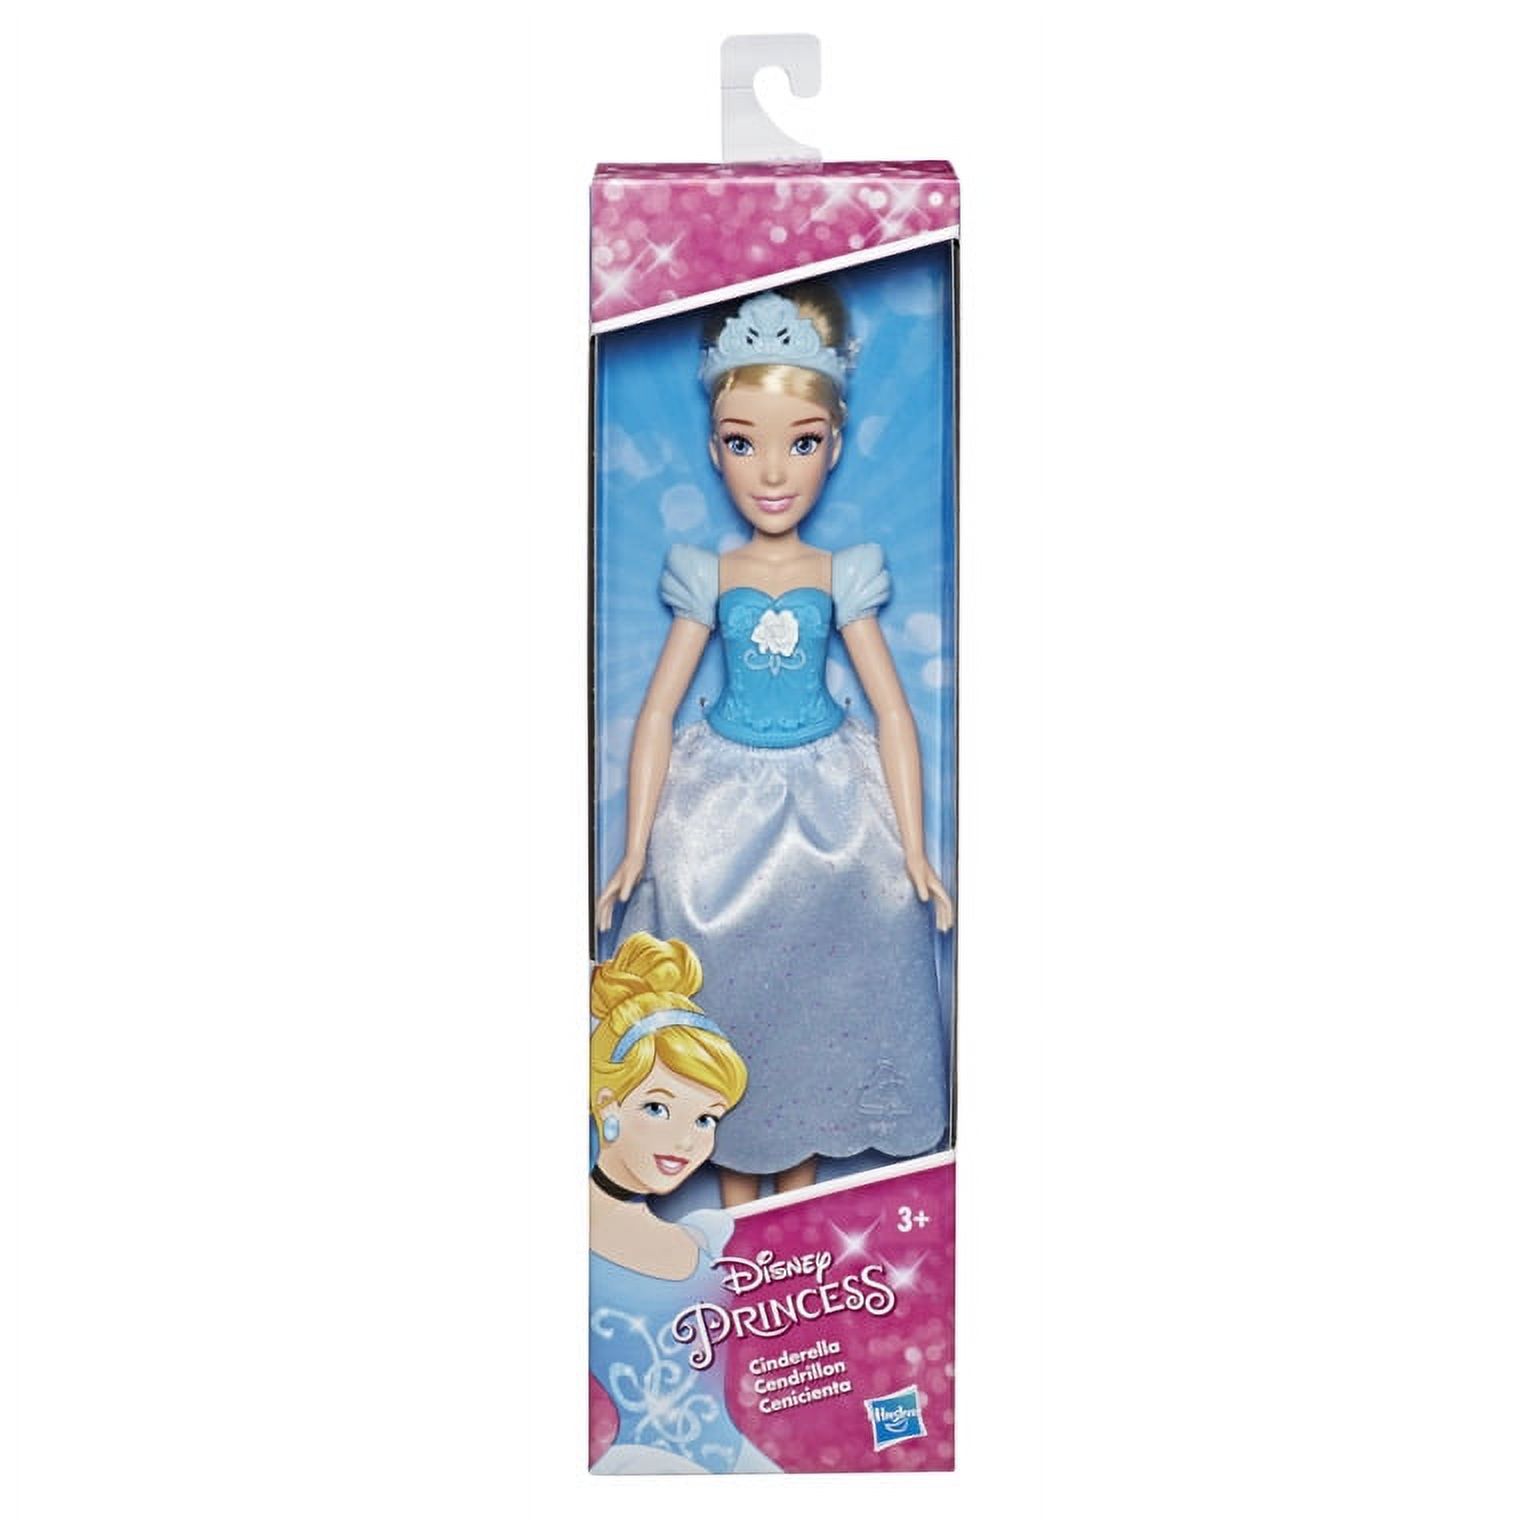 Disney Princess Cinderella Fashion Doll, for Kids Ages 3 and Up - image 2 of 4